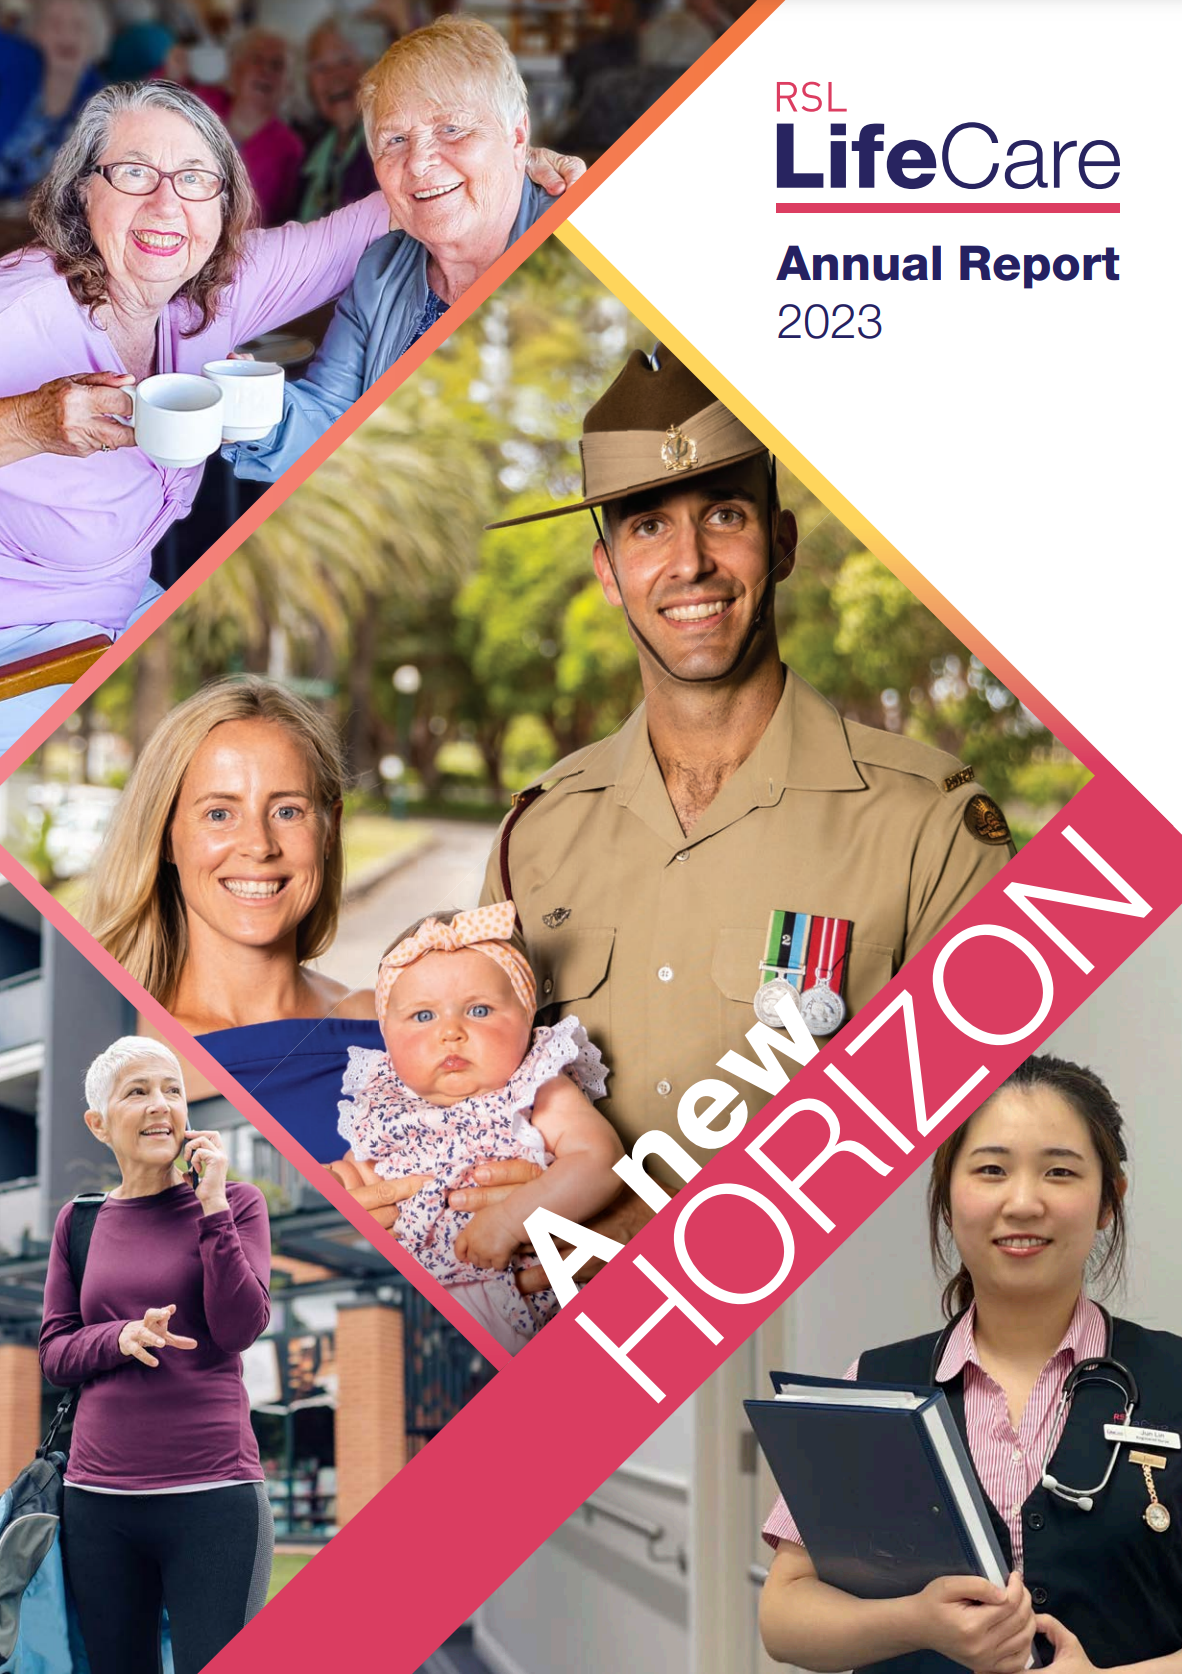 Annual-Report-2023 | RSL LifeCare - provide care and service to war veterans, retirement villages and accommodation, aged care services and assisted living